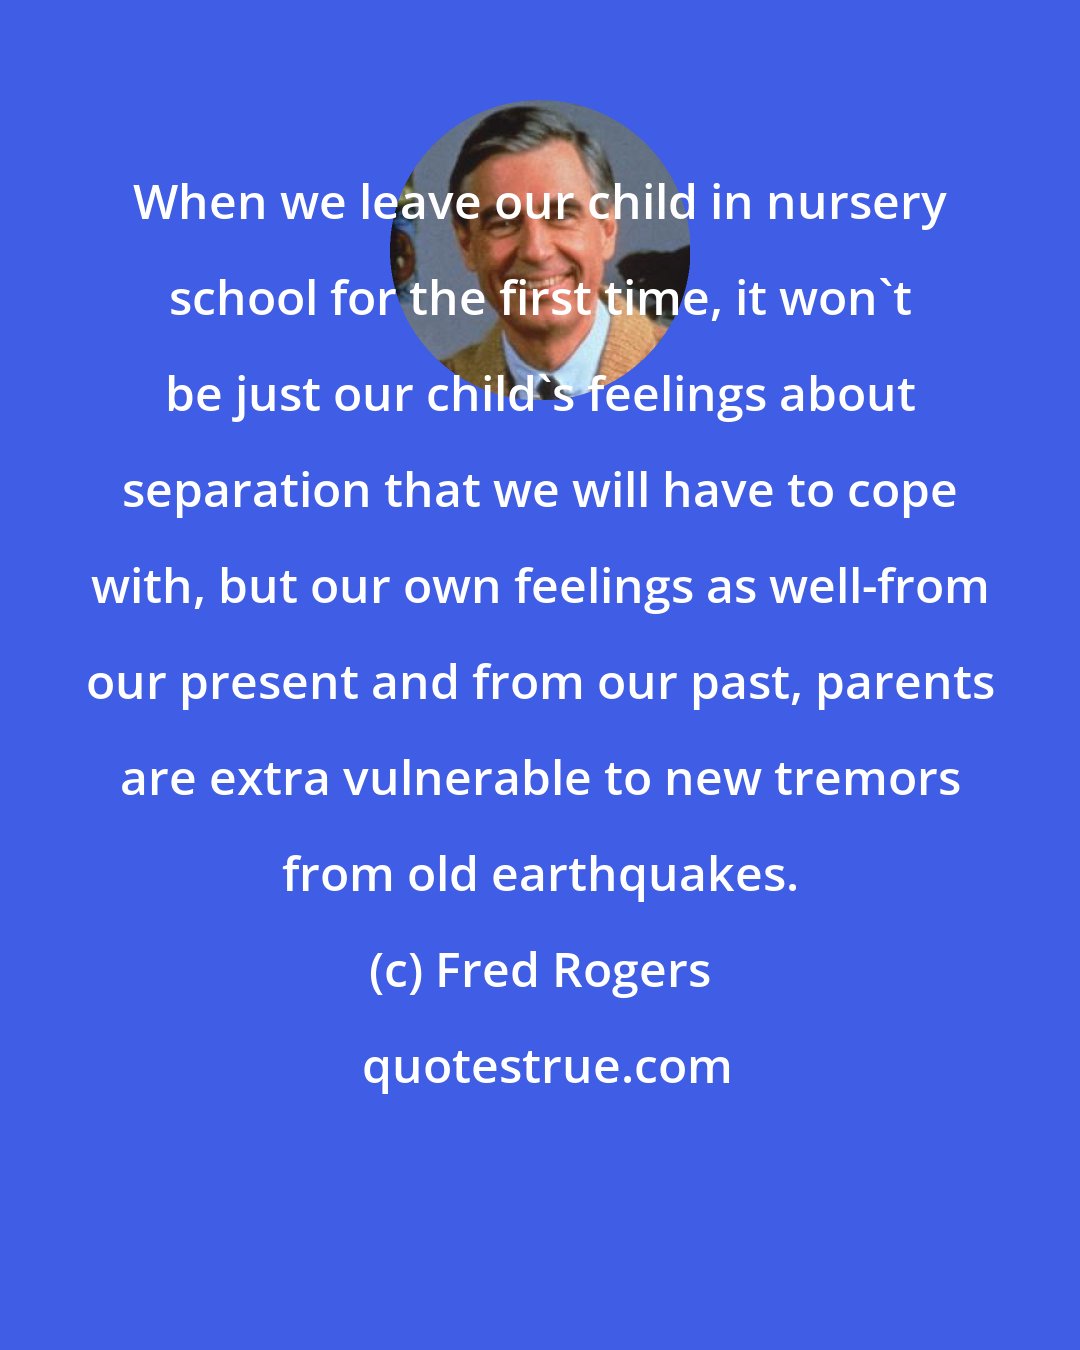 Fred Rogers: When we leave our child in nursery school for the first time, it won't be just our child's feelings about separation that we will have to cope with, but our own feelings as well-from our present and from our past, parents are extra vulnerable to new tremors from old earthquakes.